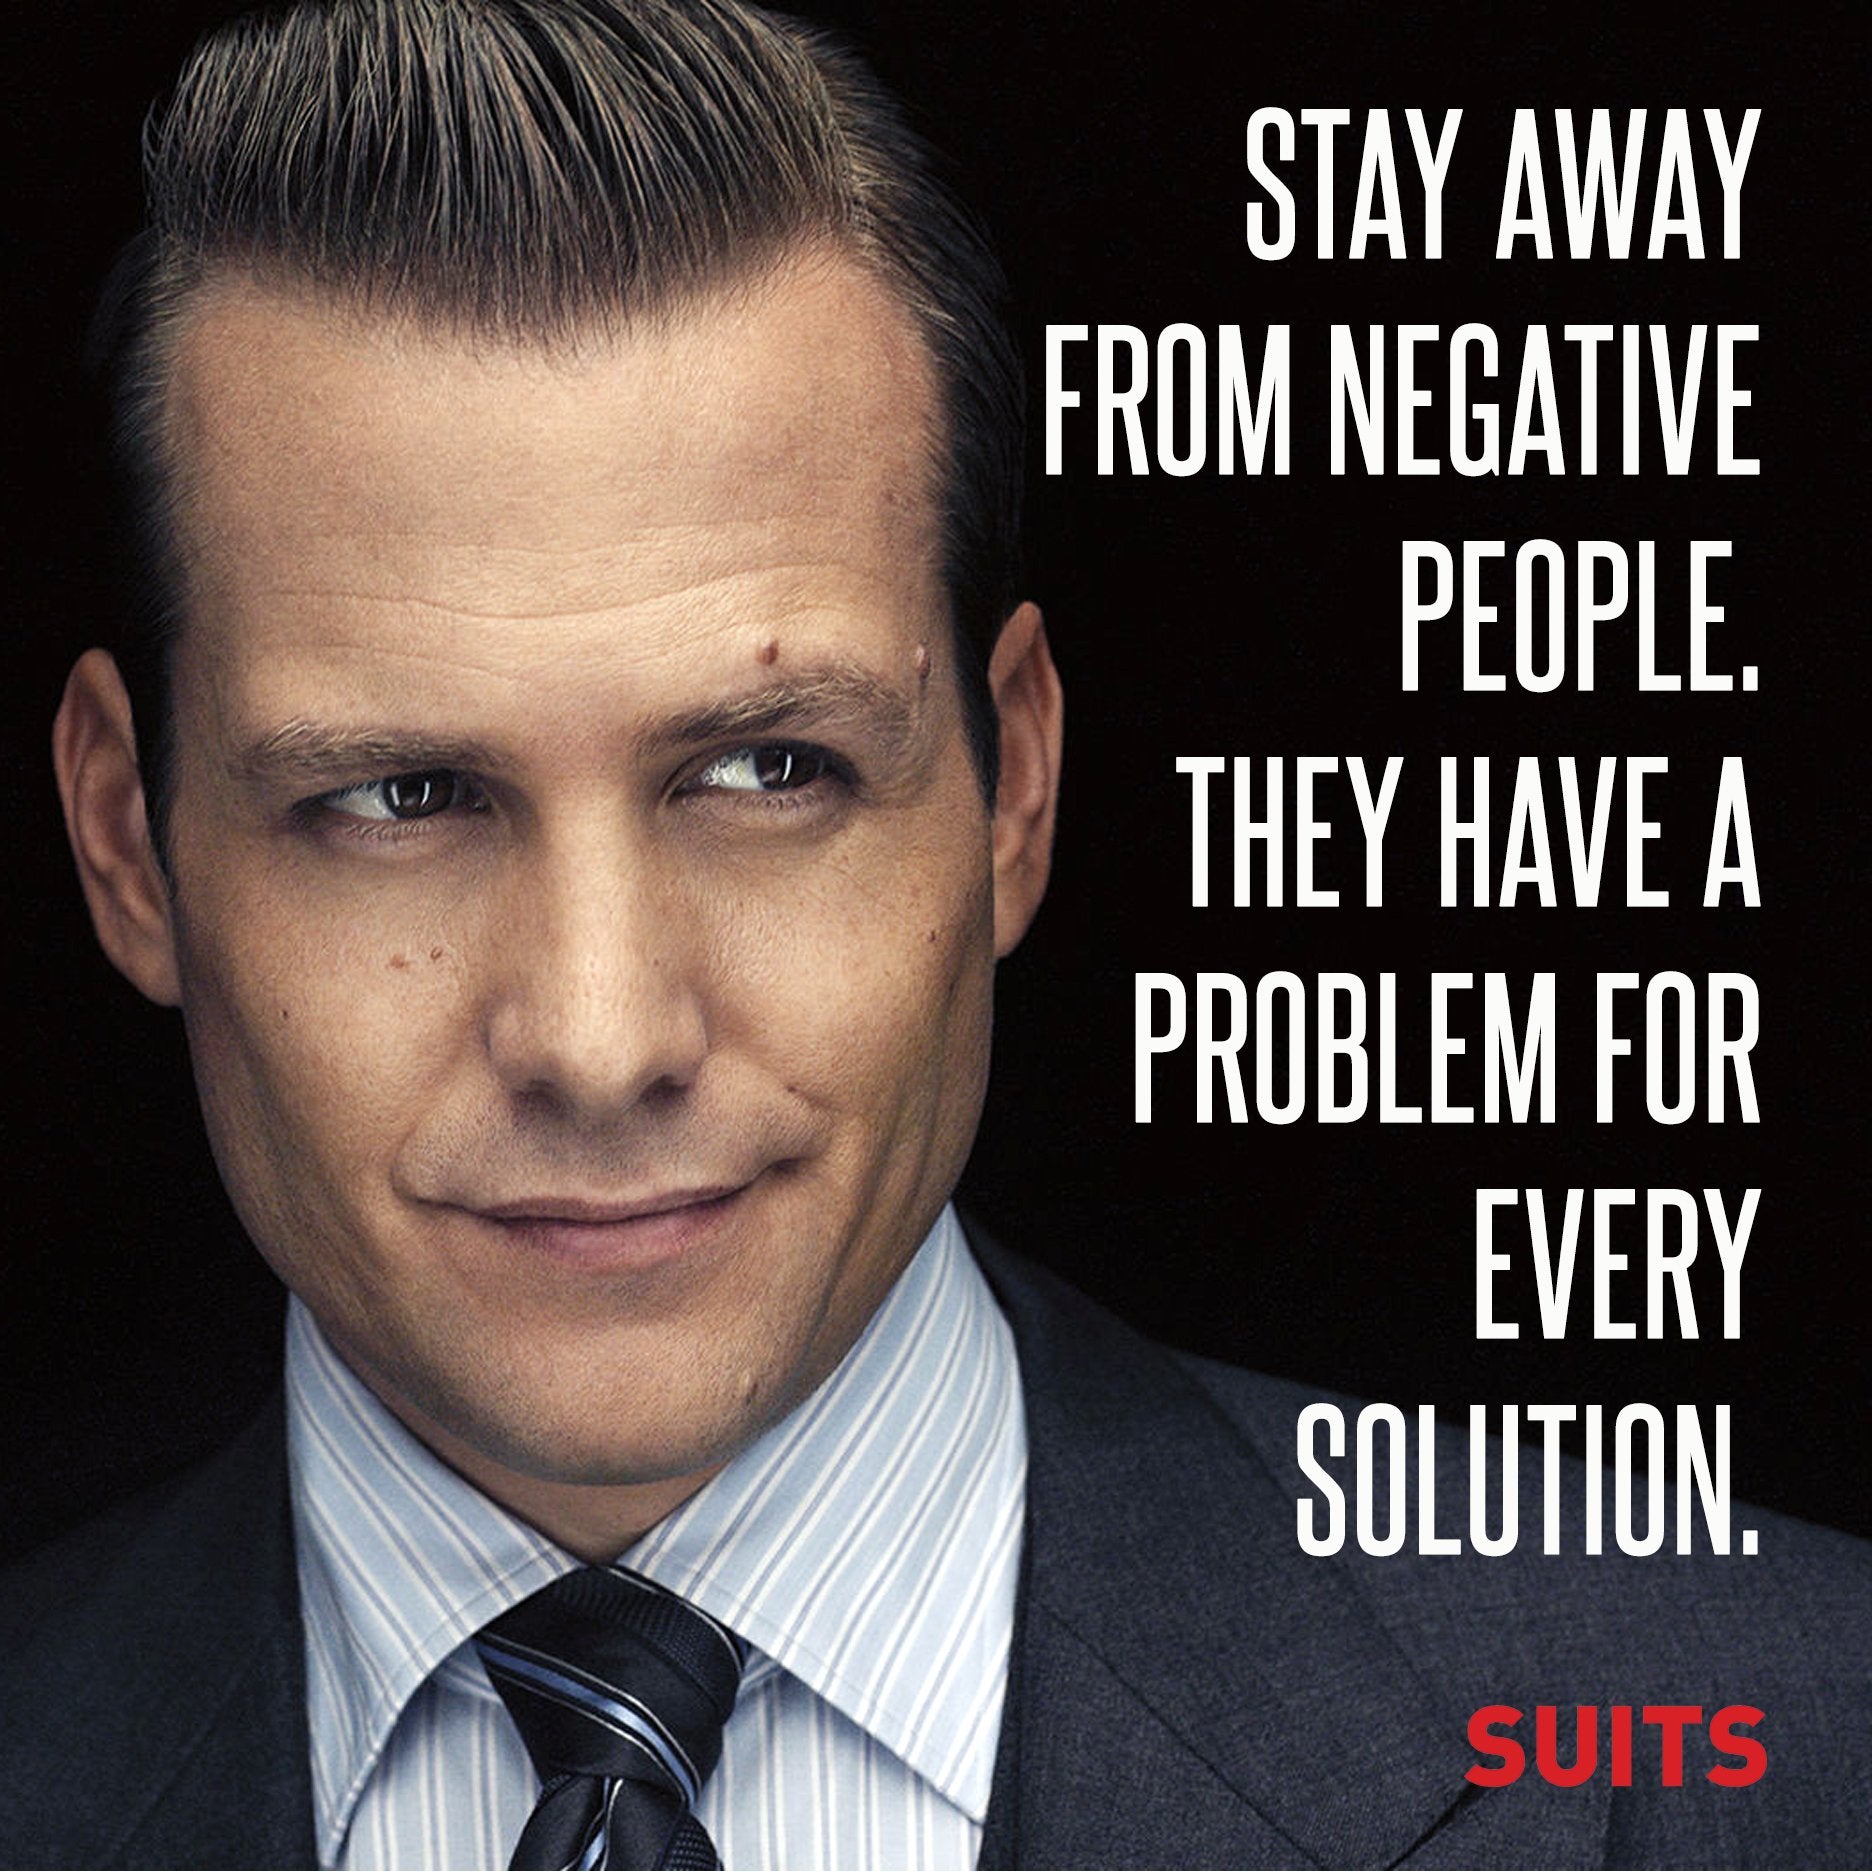 Suits An American Legal Drama Television Series Harvey Specter Mike Ross  Rachel Zane Matte Finish Poster Paper Print - Personalities posters in  India - Buy art, film, design, movie, music, nature and